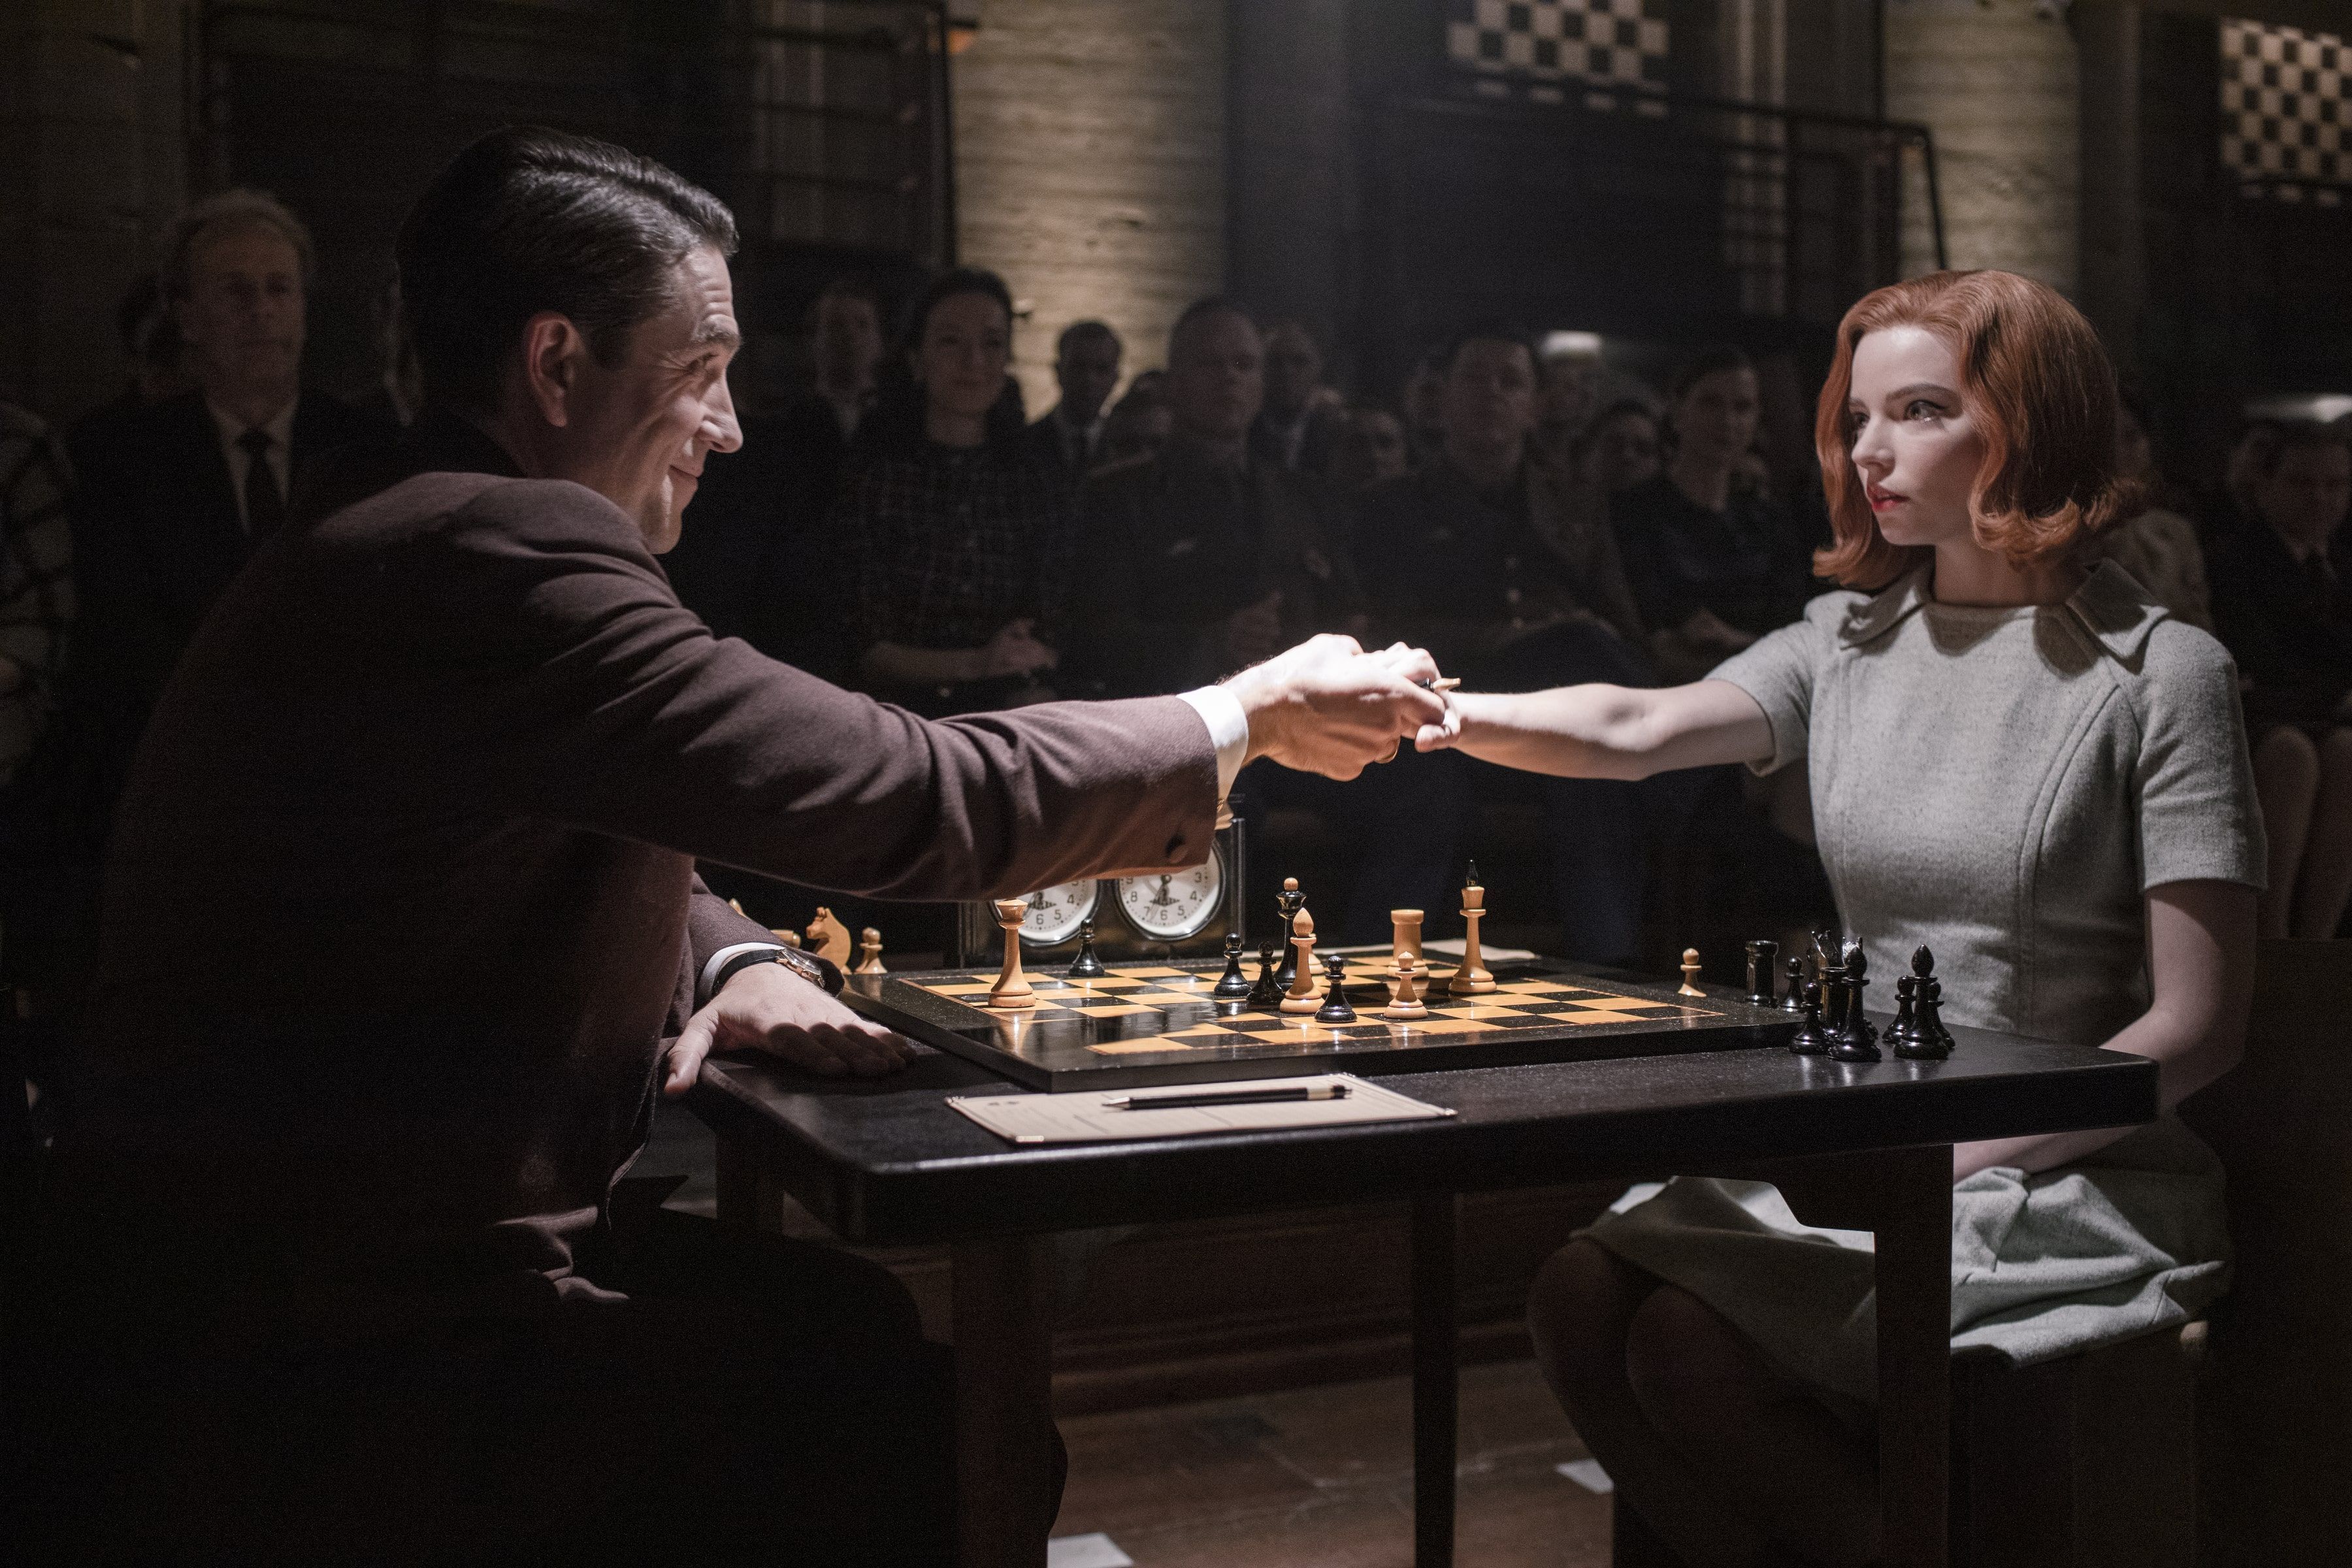 Is 'The Queen's Gambit' Based on a True Story? - Beth Harmon in Real Life